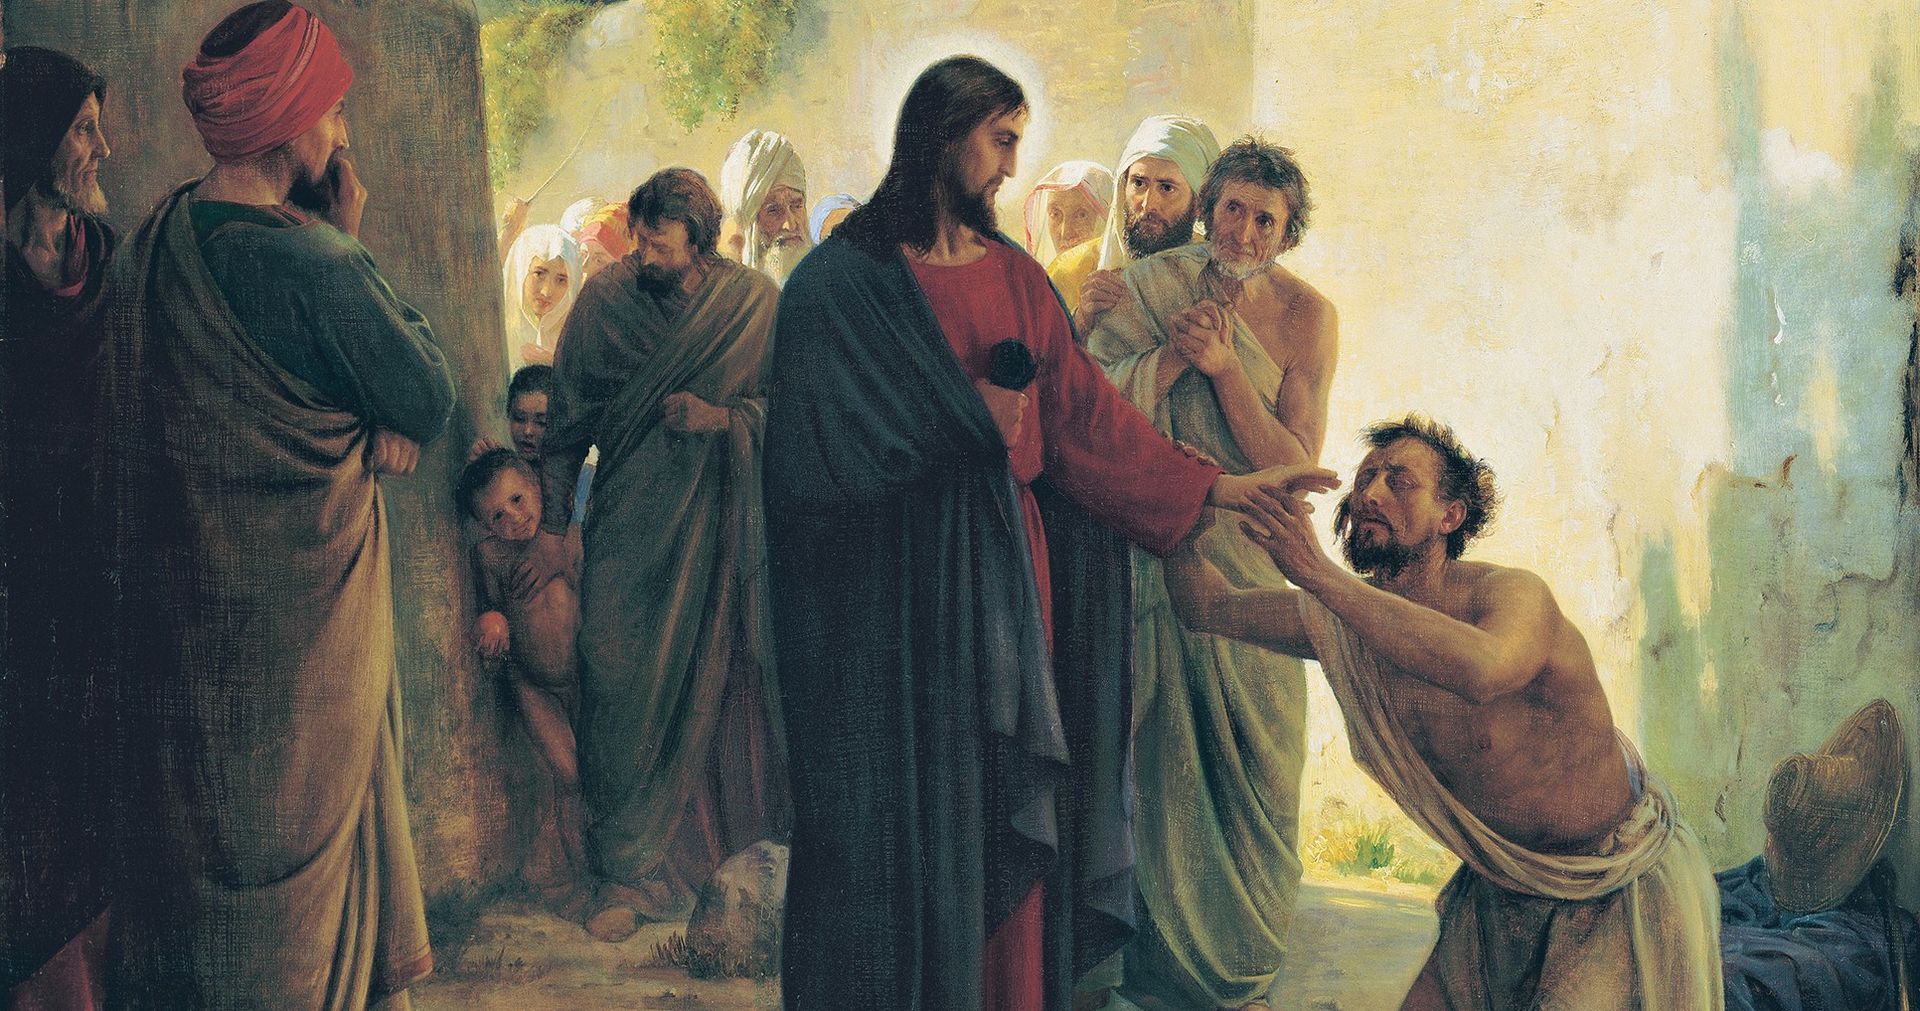 Painting of Jesus Christ reaching out to heal a blind man as people around Him observe.